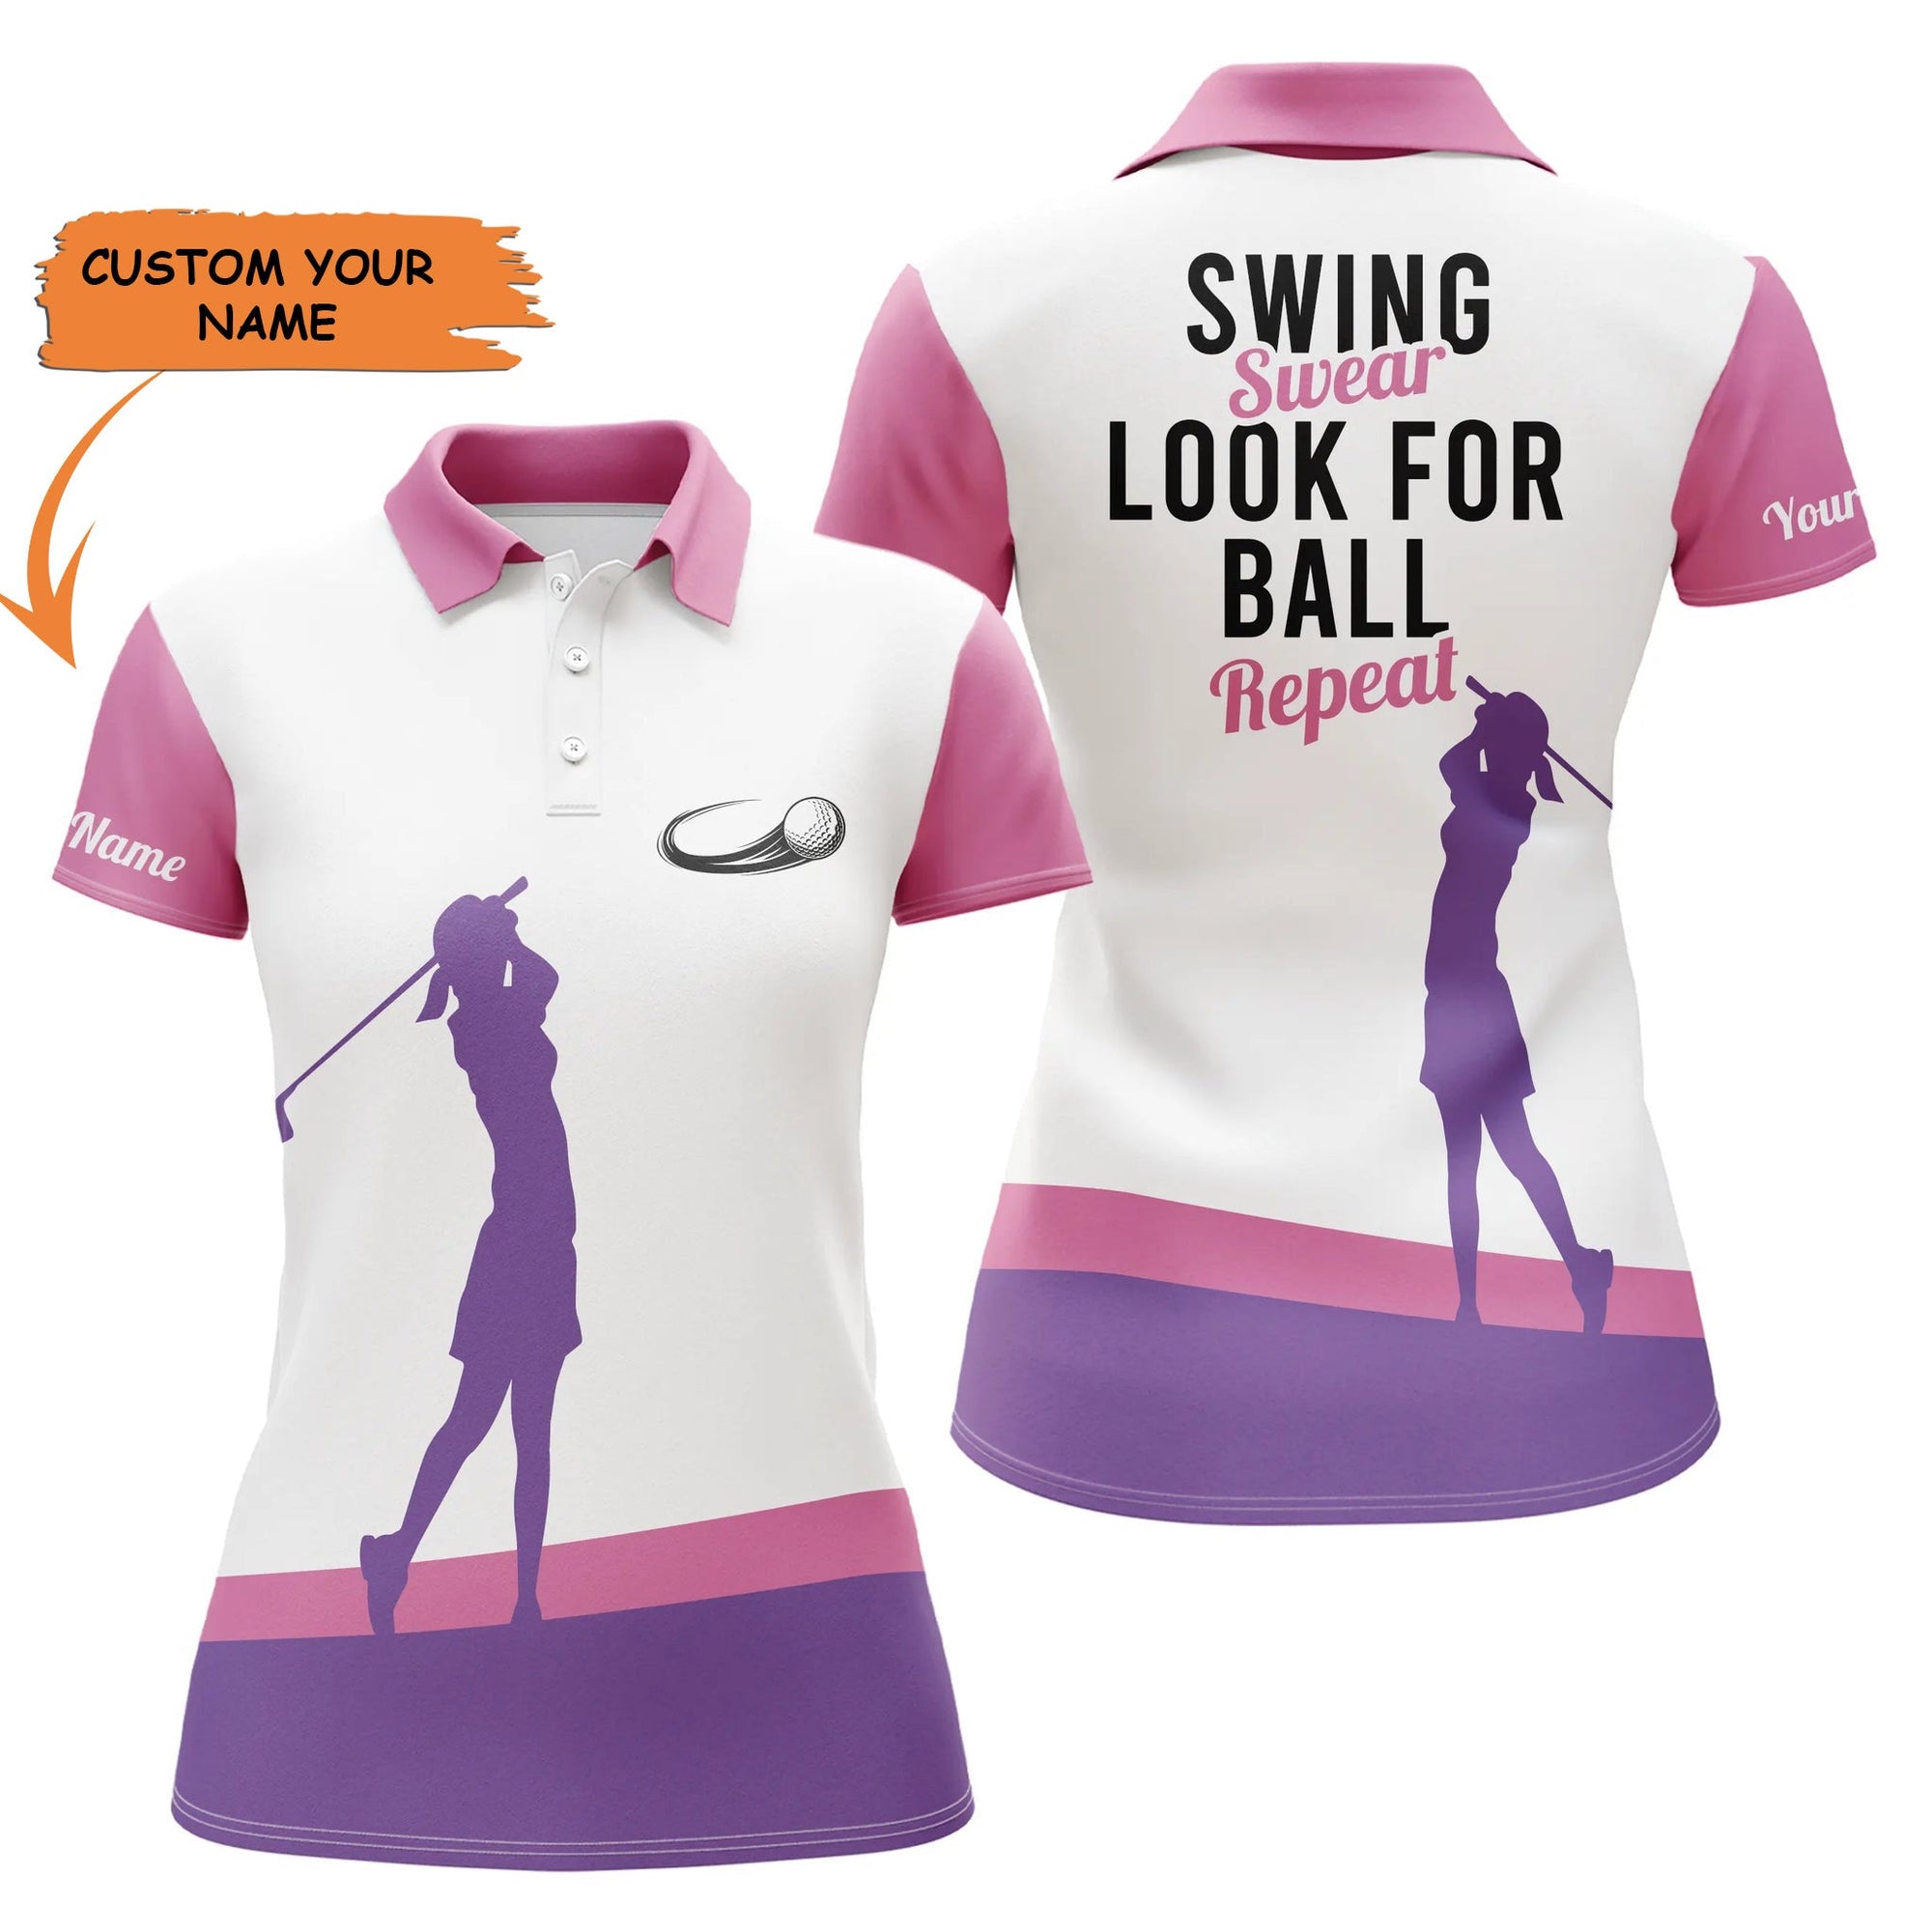 Golf Women Polo Shirt, Swing Swear Look For Ball Repeat Golf Polo Shirts, White And Pink Golf Shirt For Ladies - Perfect Gift For Women, Ladies